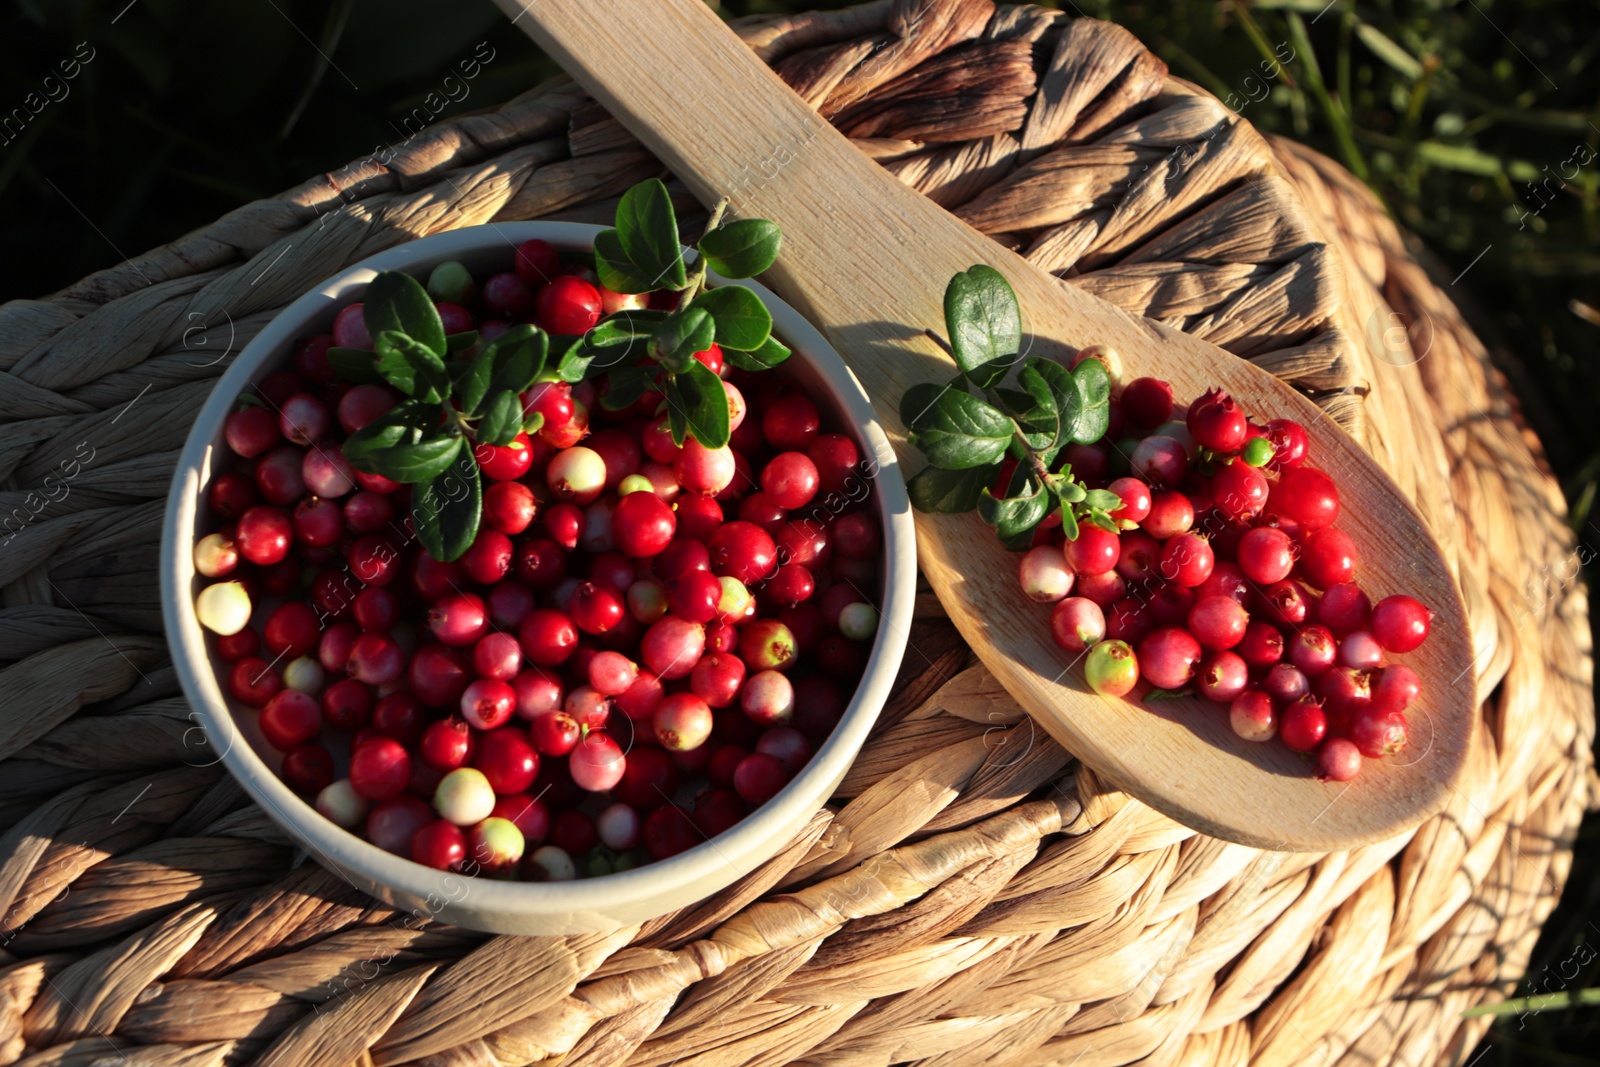 Photo of Delicious ripe red lingonberries in bowl and wooden spoon on wicker basket outdoors, above view